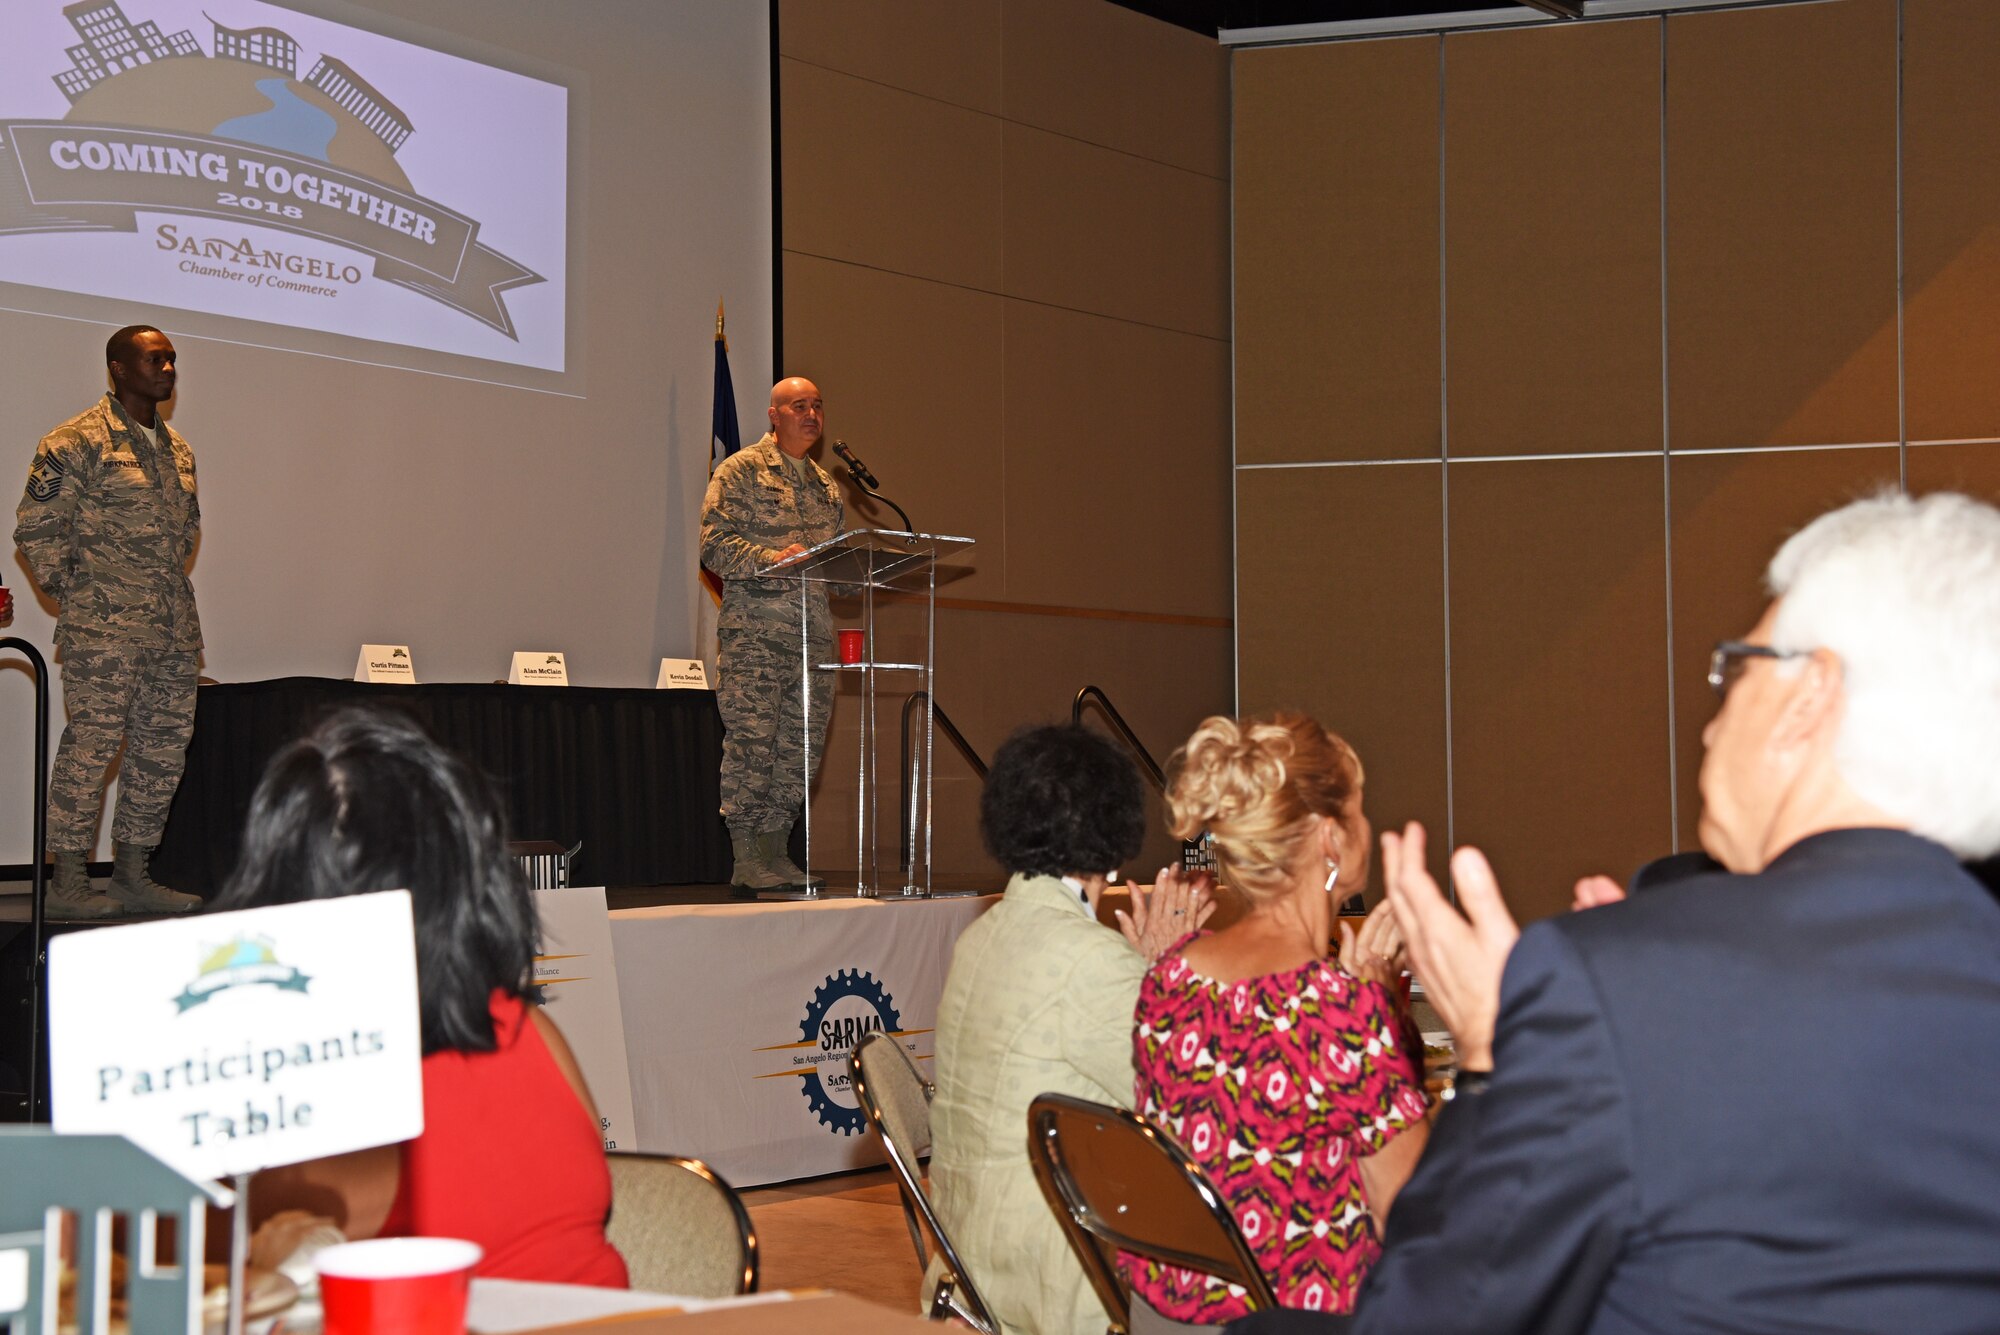 U.S. Air Force Col. Robert Ramirez, 17th Training Wing vice commander, speaks during a San Angelo Chamber of Commerce luncheon at the McNease Convention Center in San Angelo, Texas, Aug. 14, 2018. Ramirez express excitement to be stationed at Goodfellow Air Force Base for the third time in his career. (U.S. Air Force photo by Staff Sgt. Joshua Edwards/Released)